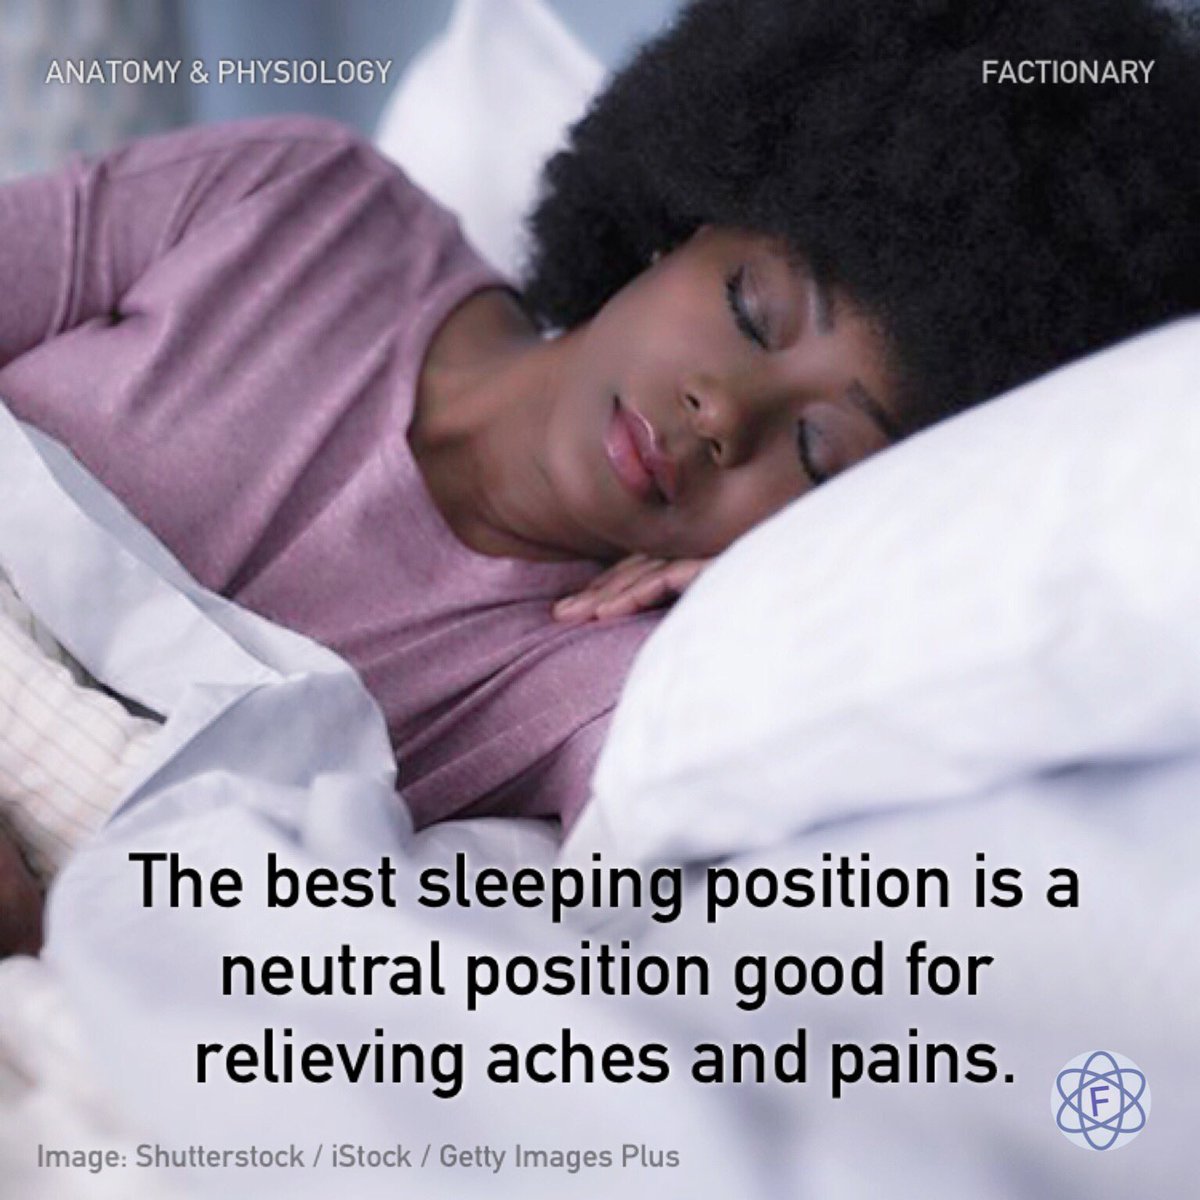 The best sleeping position is a neutral position good for relieving aches and pains.

#anatomyandphysiology #sleeping #position #sleepingontheback #painrelieve #health #facts #Factionary